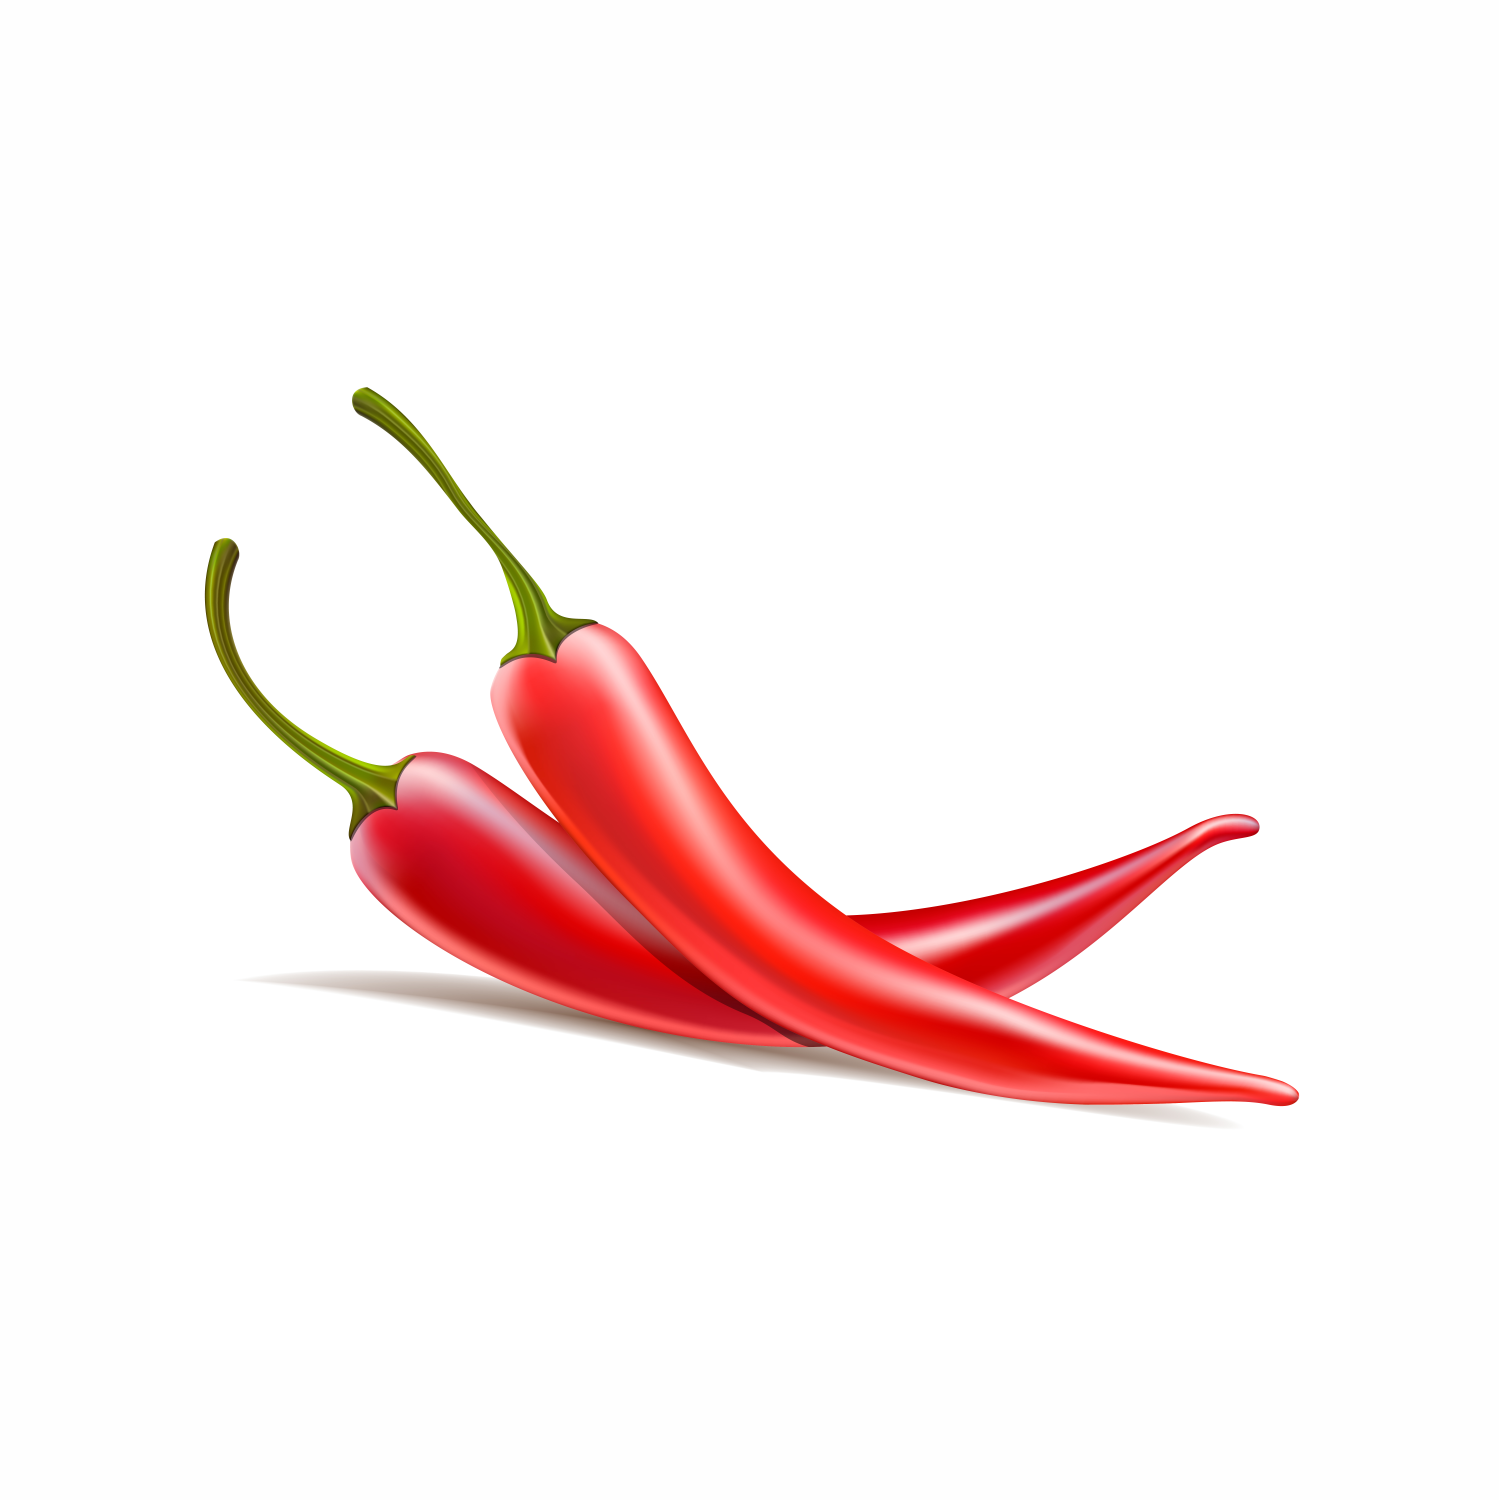 Capsicum Frutescens (Cayenne) Extract